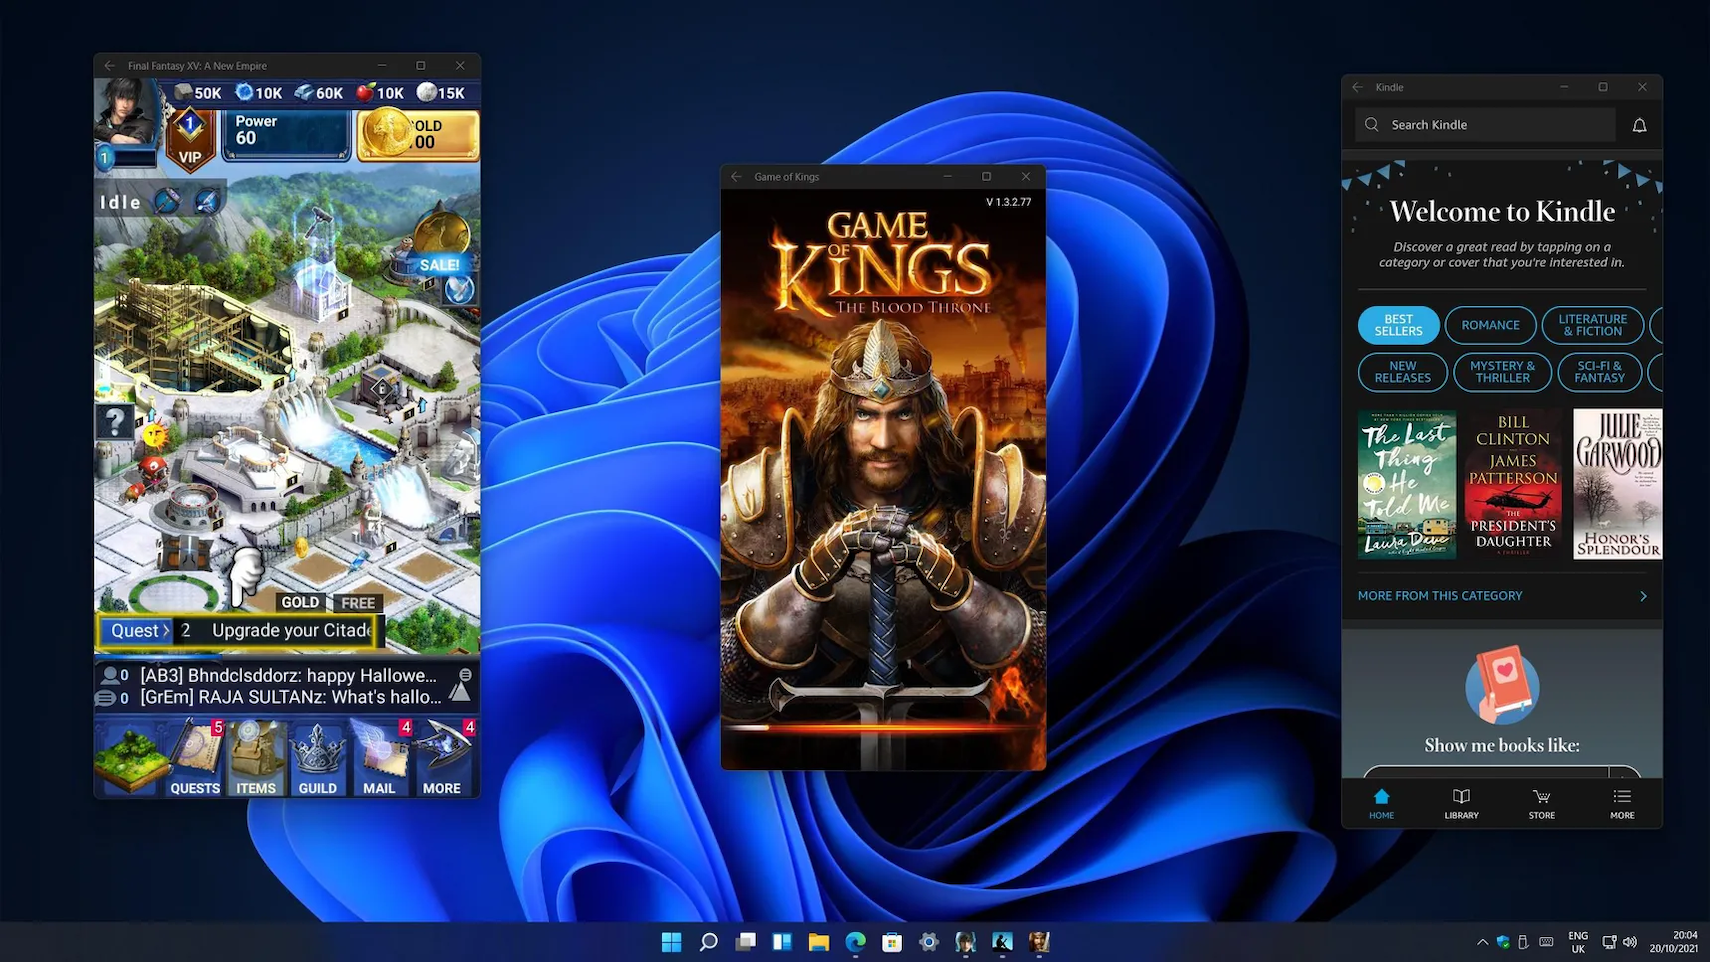 Windows 11  The Best Windows Ever for Gaming 